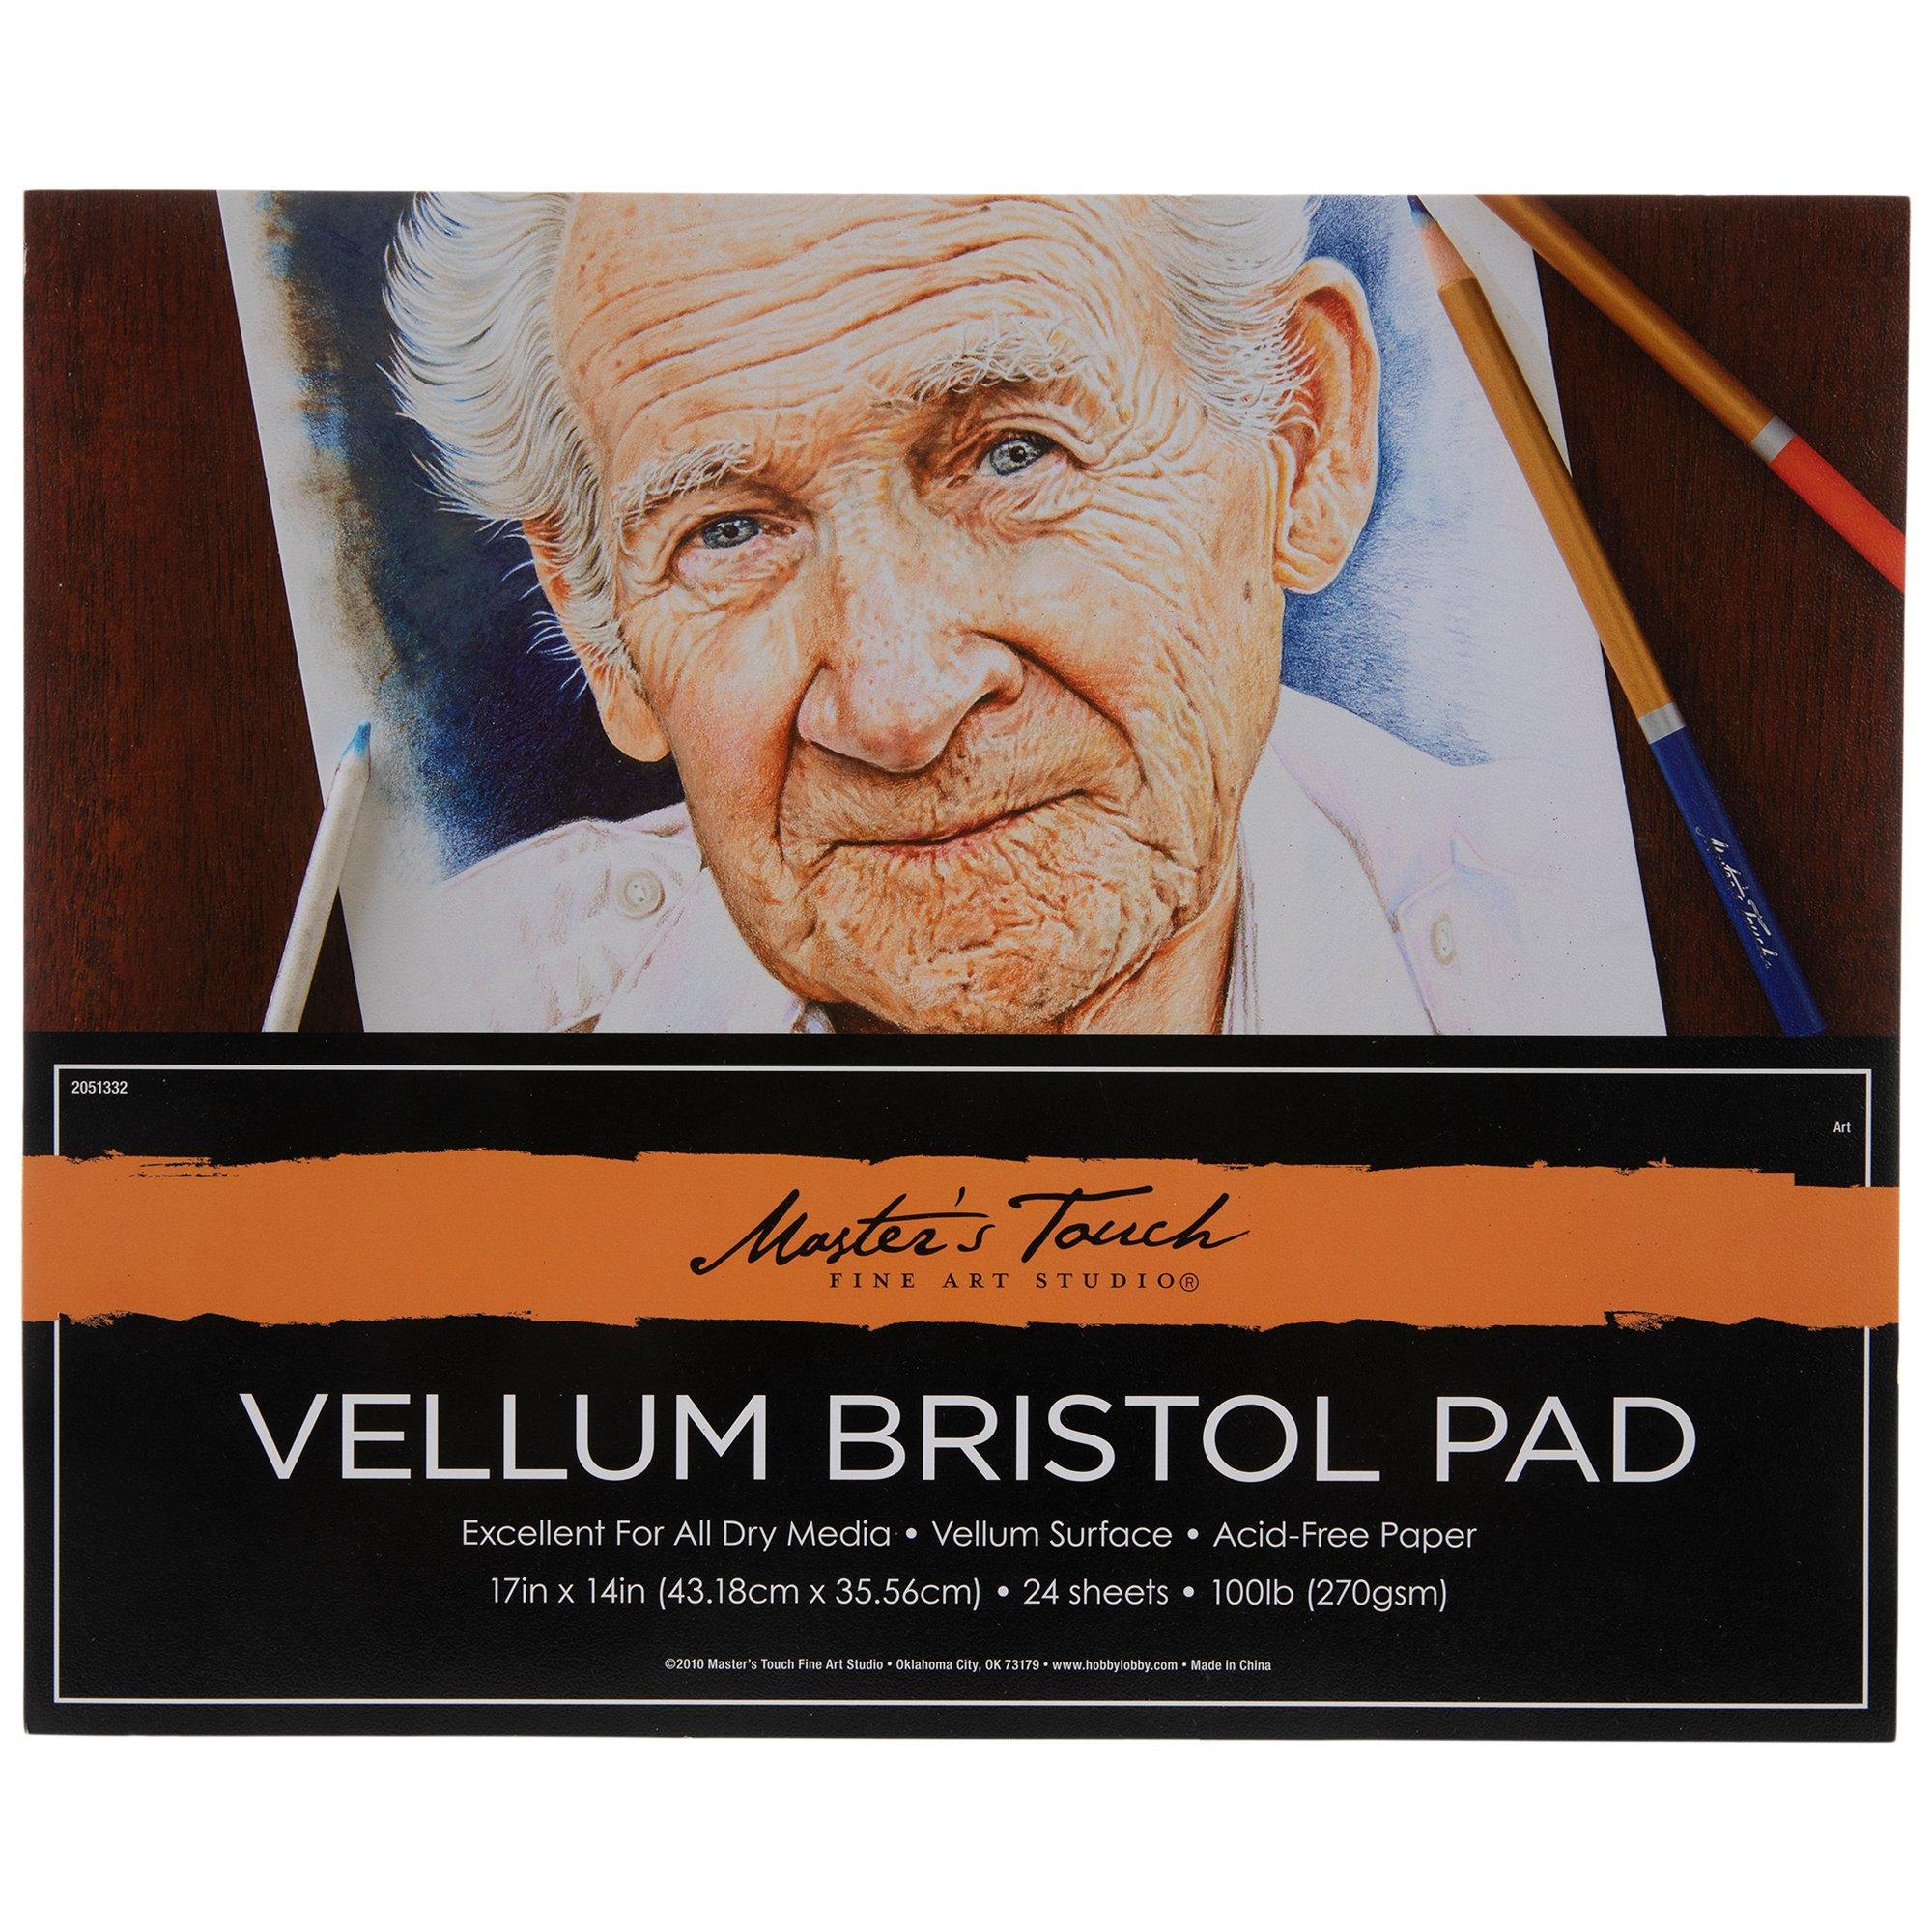 Strathmore Bristol Smooth Paper Pad 14X17-20 Sheets 